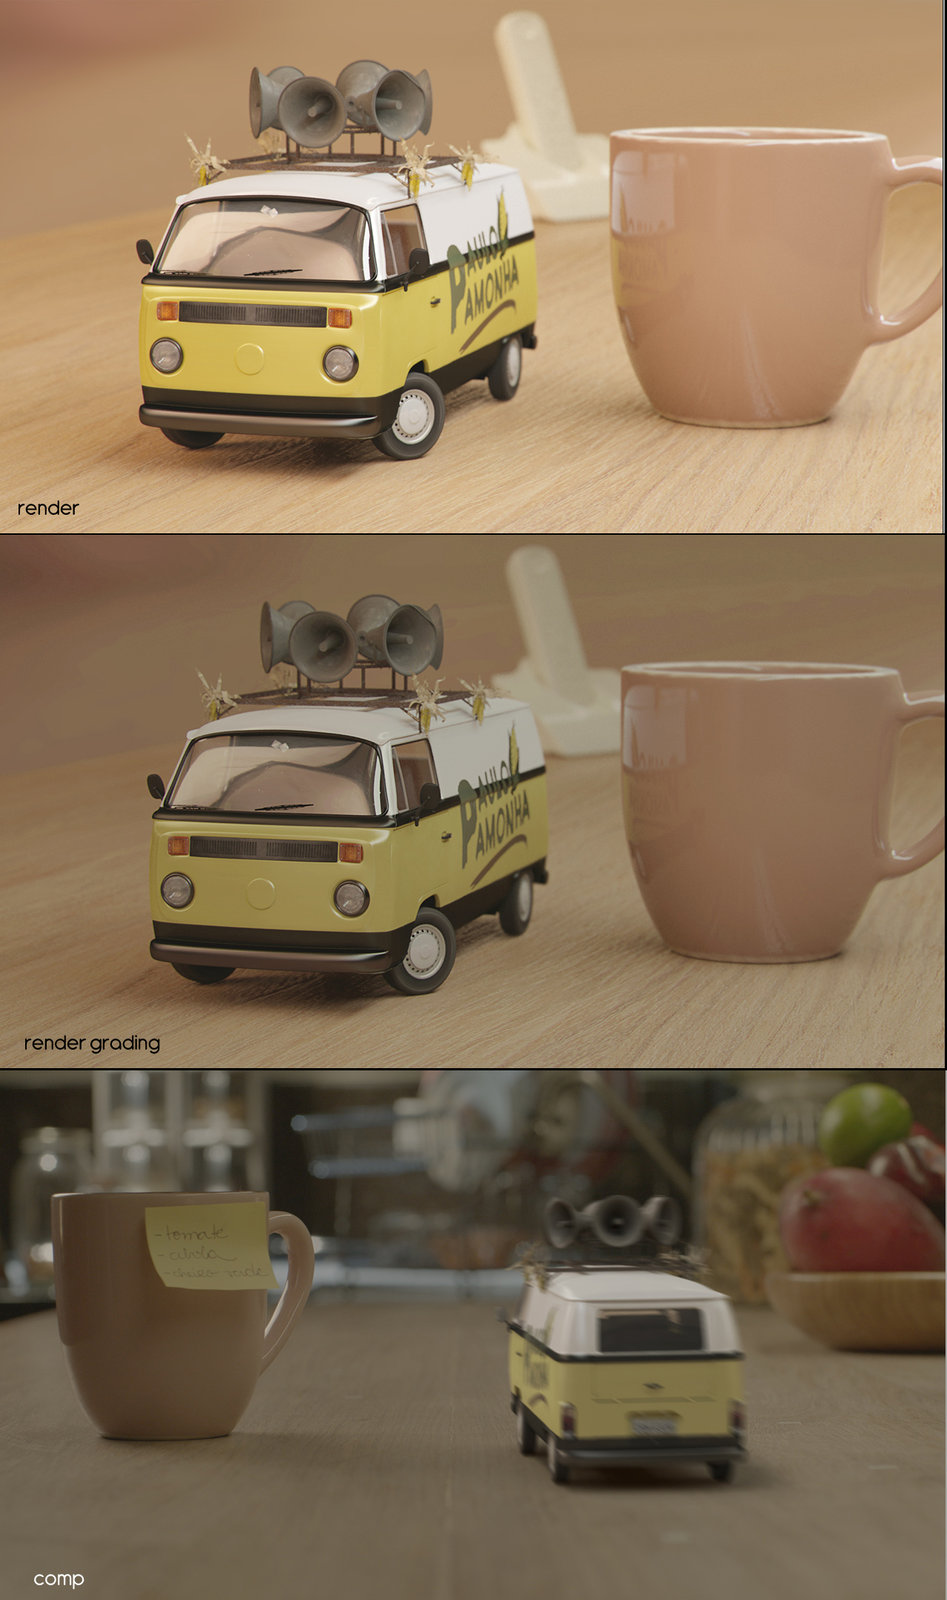 Shading Progress, The first 2 are full Cg, the last one just the Kombi is CG.